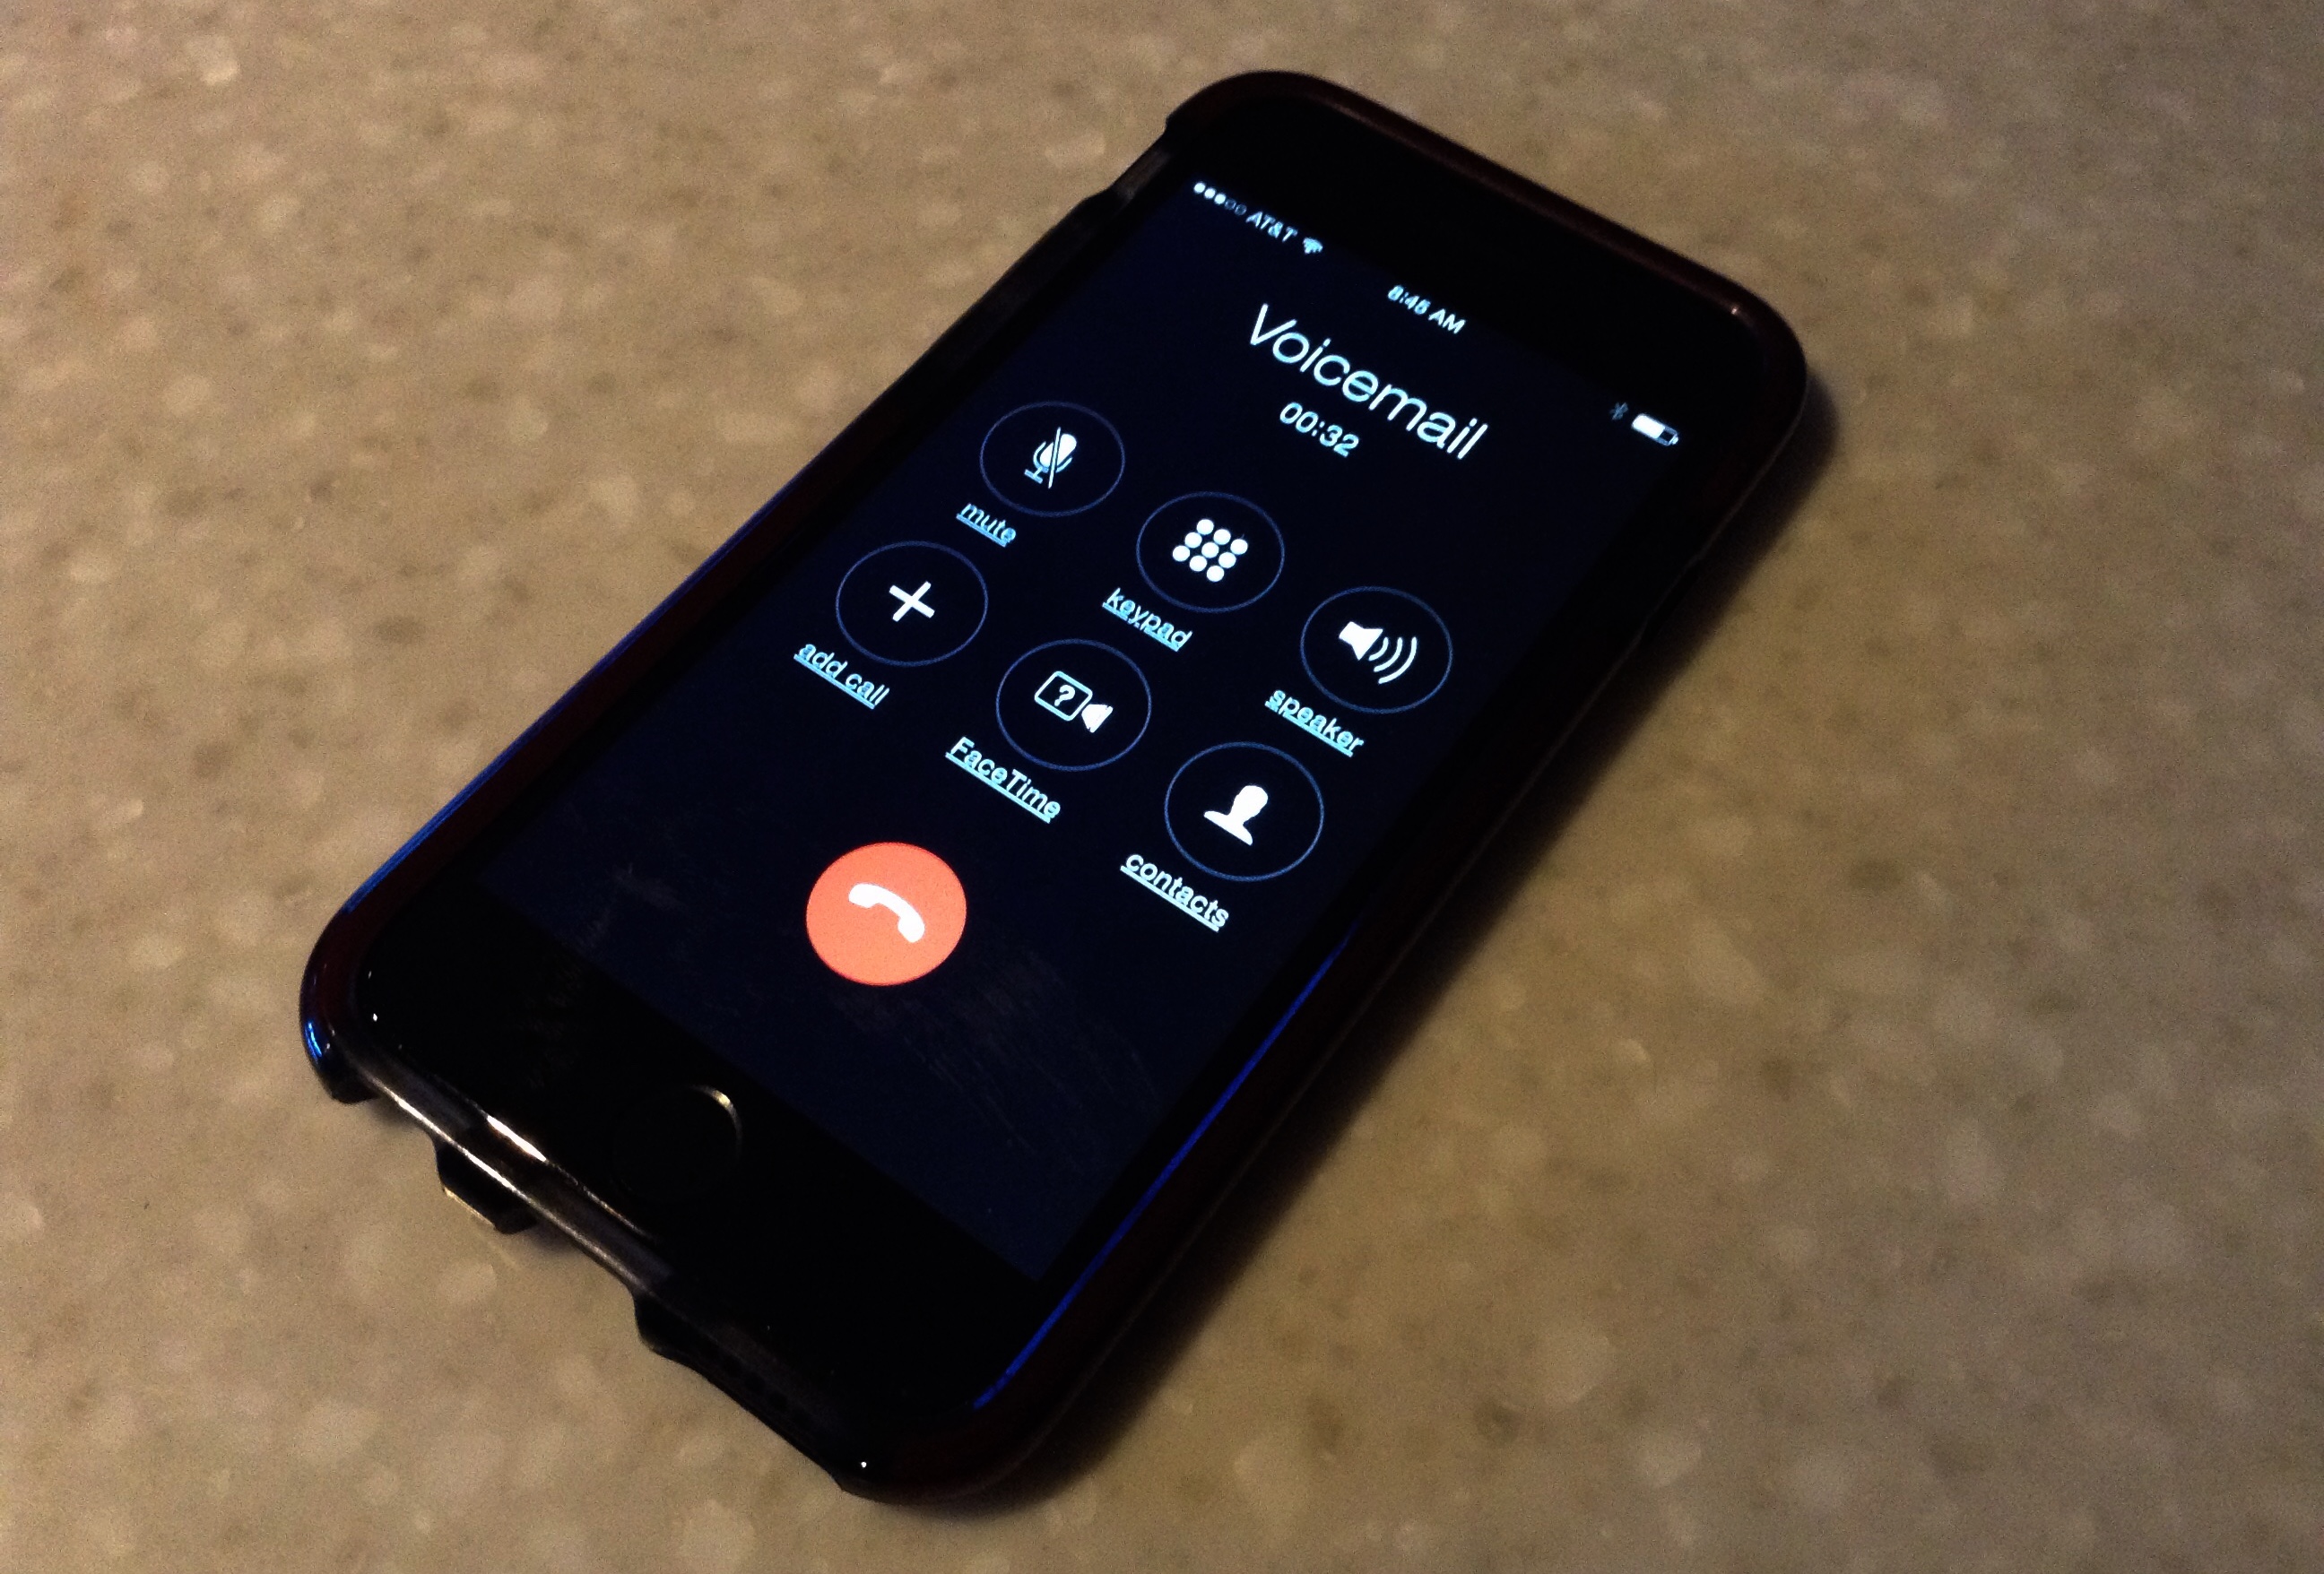 Web app preserves dead loved one’s voicemail greeting